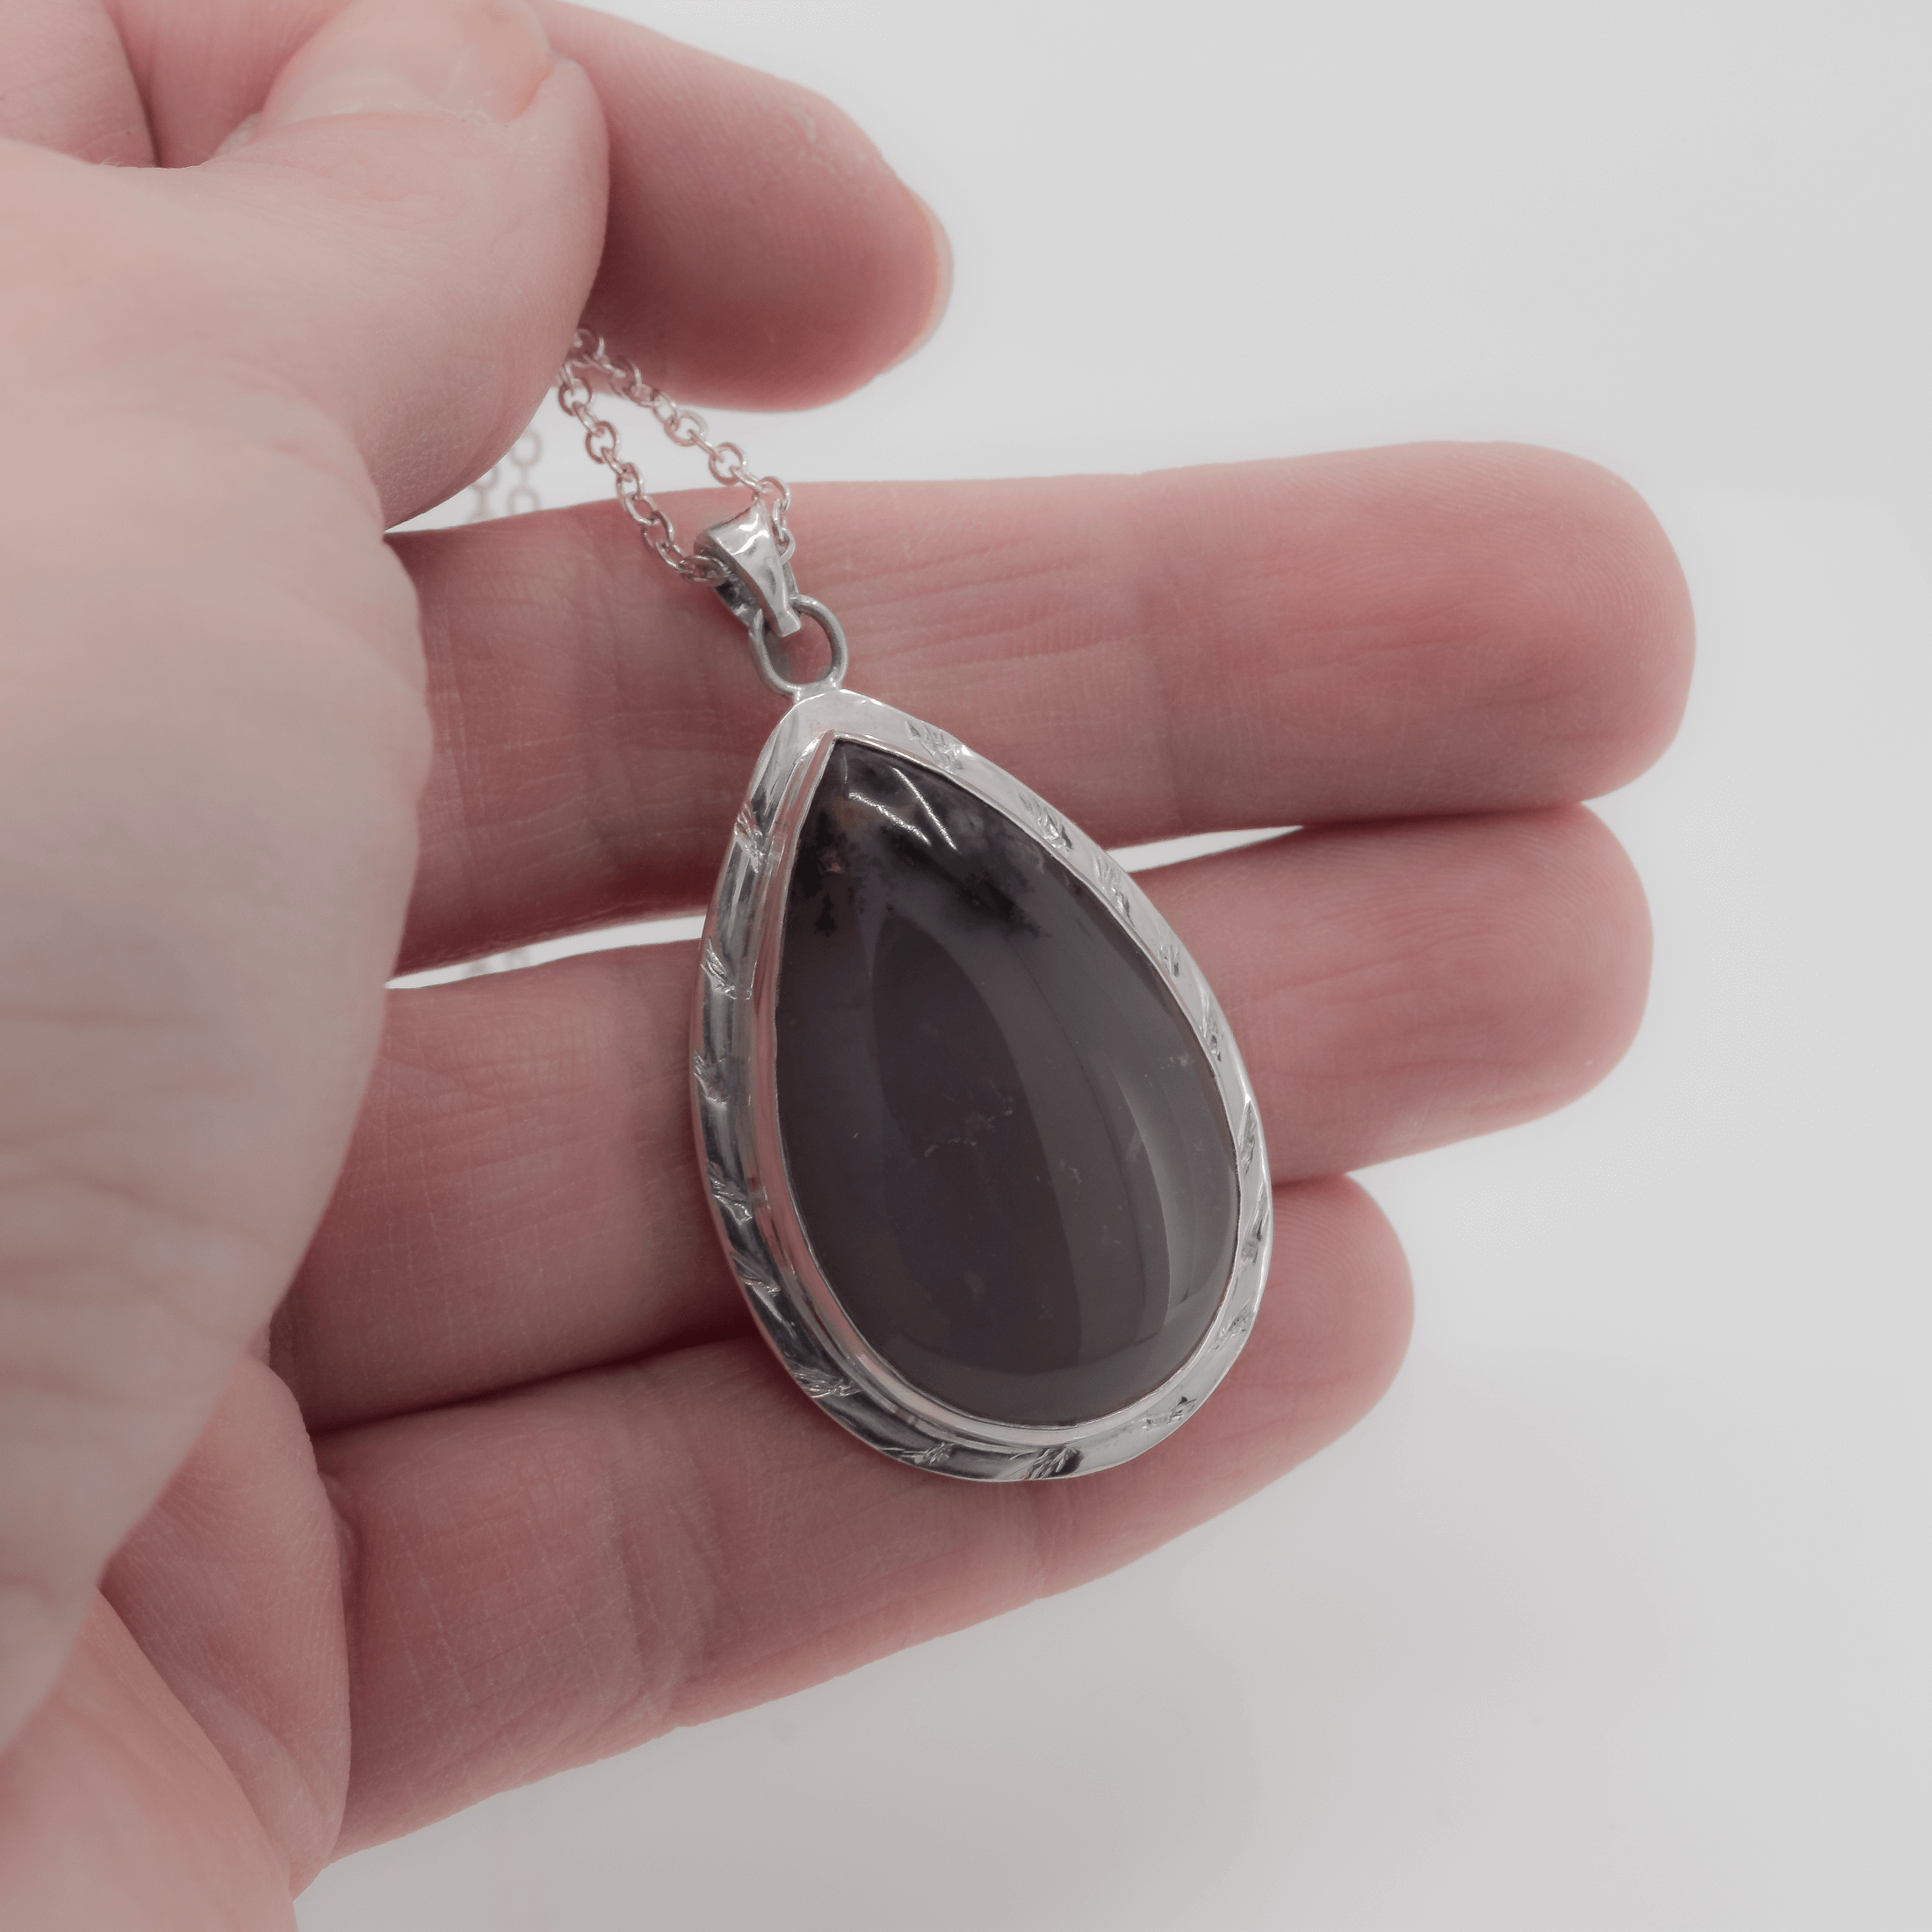 Terardrop amethyst pendant necklace with branch like texture going all around the stone. The stone also has sage inclusions at the top, giving it a more natural look. Pendant shown in hand for scale.